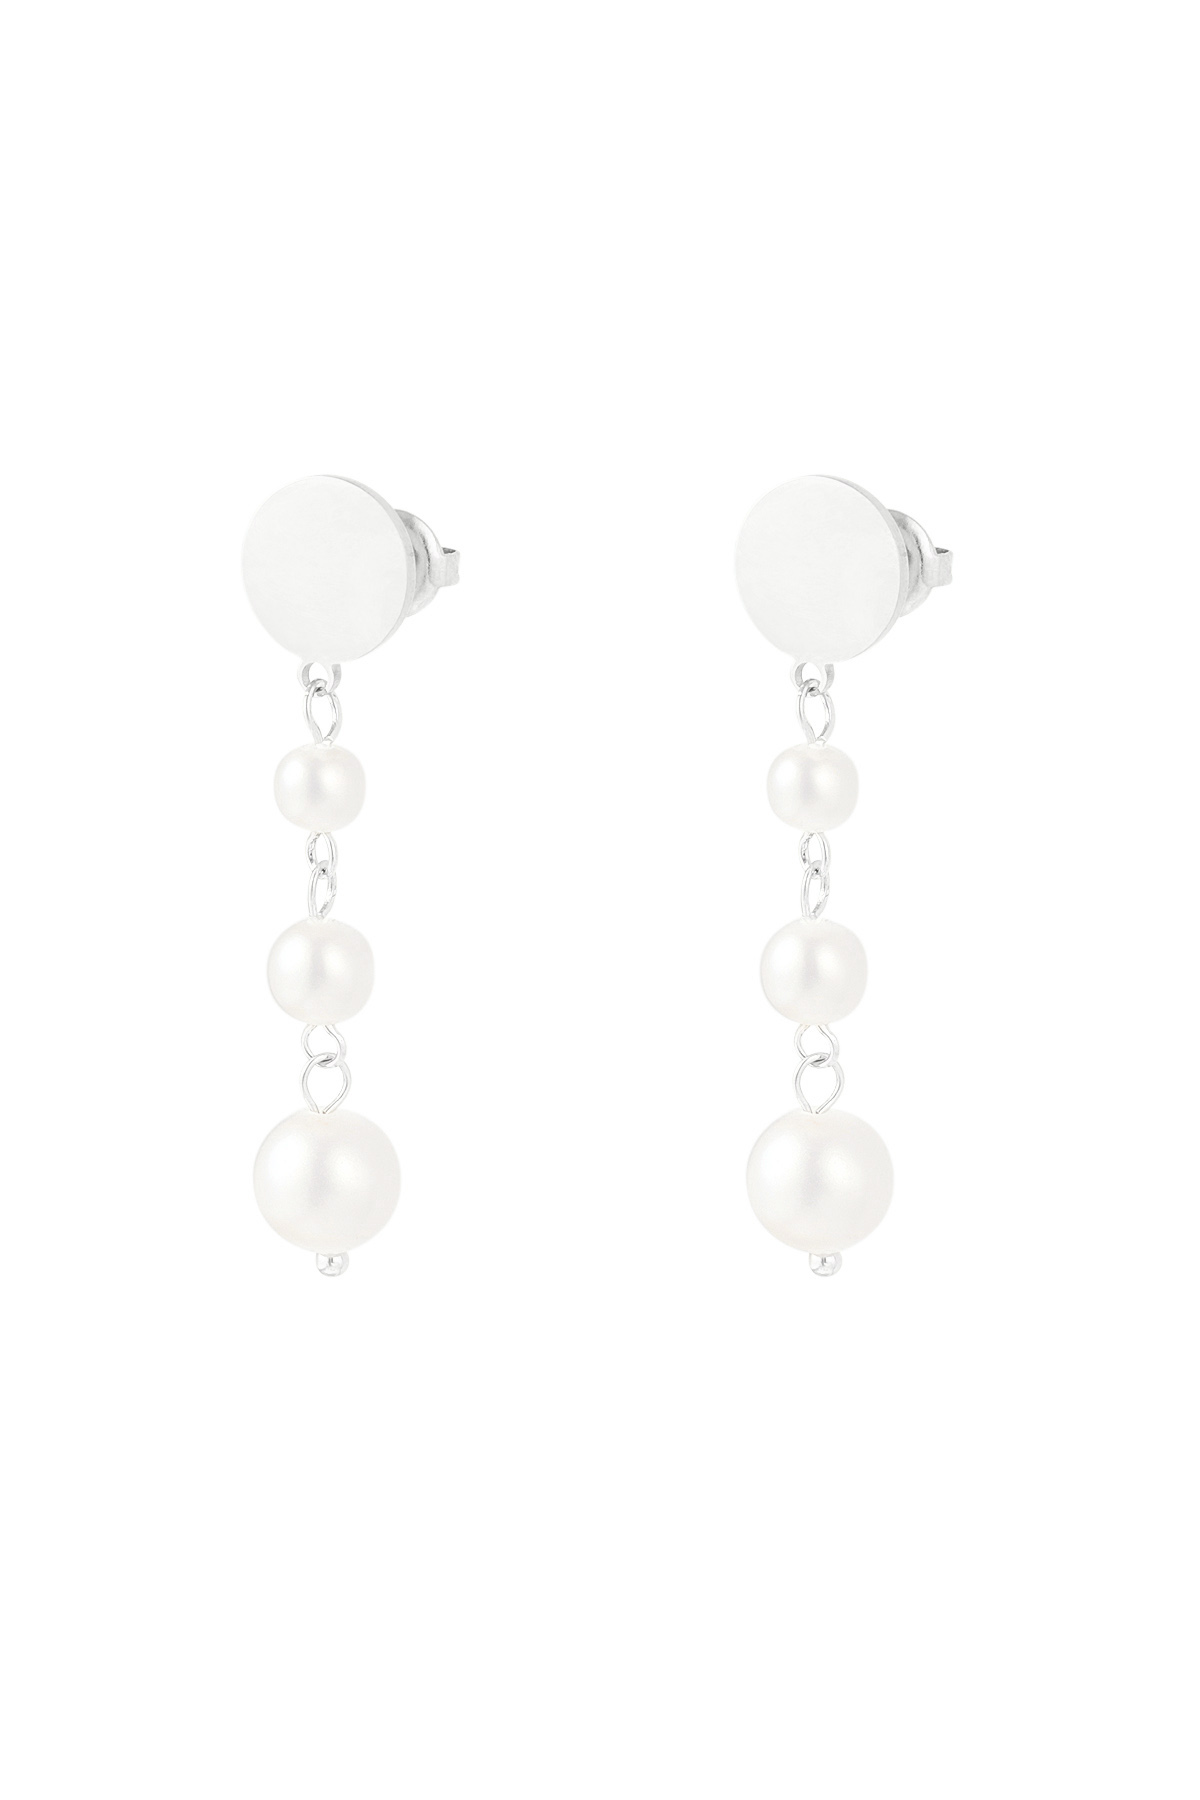 Hang earrings with pearls - silver 